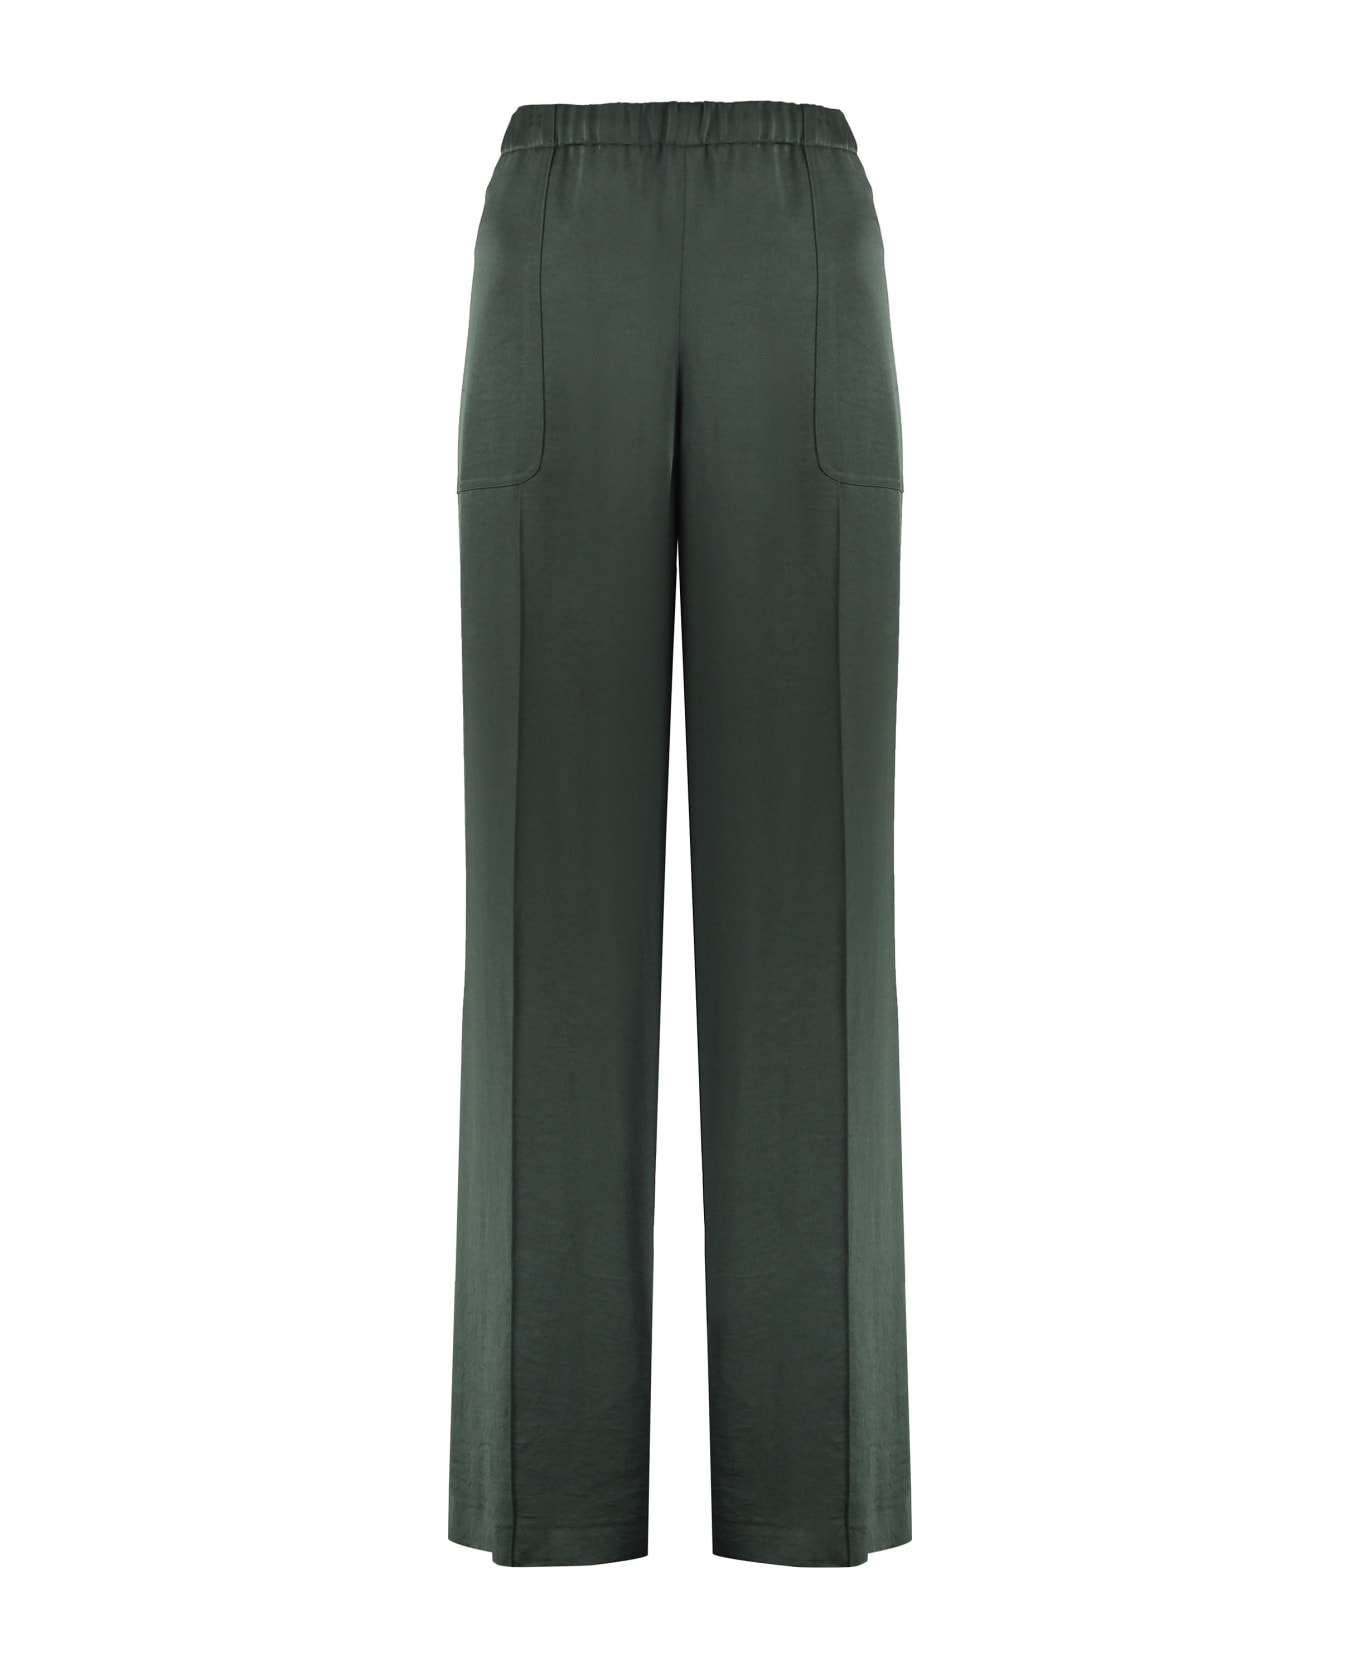 Vince Satin Trousers - Npi Night Pine ボトムス